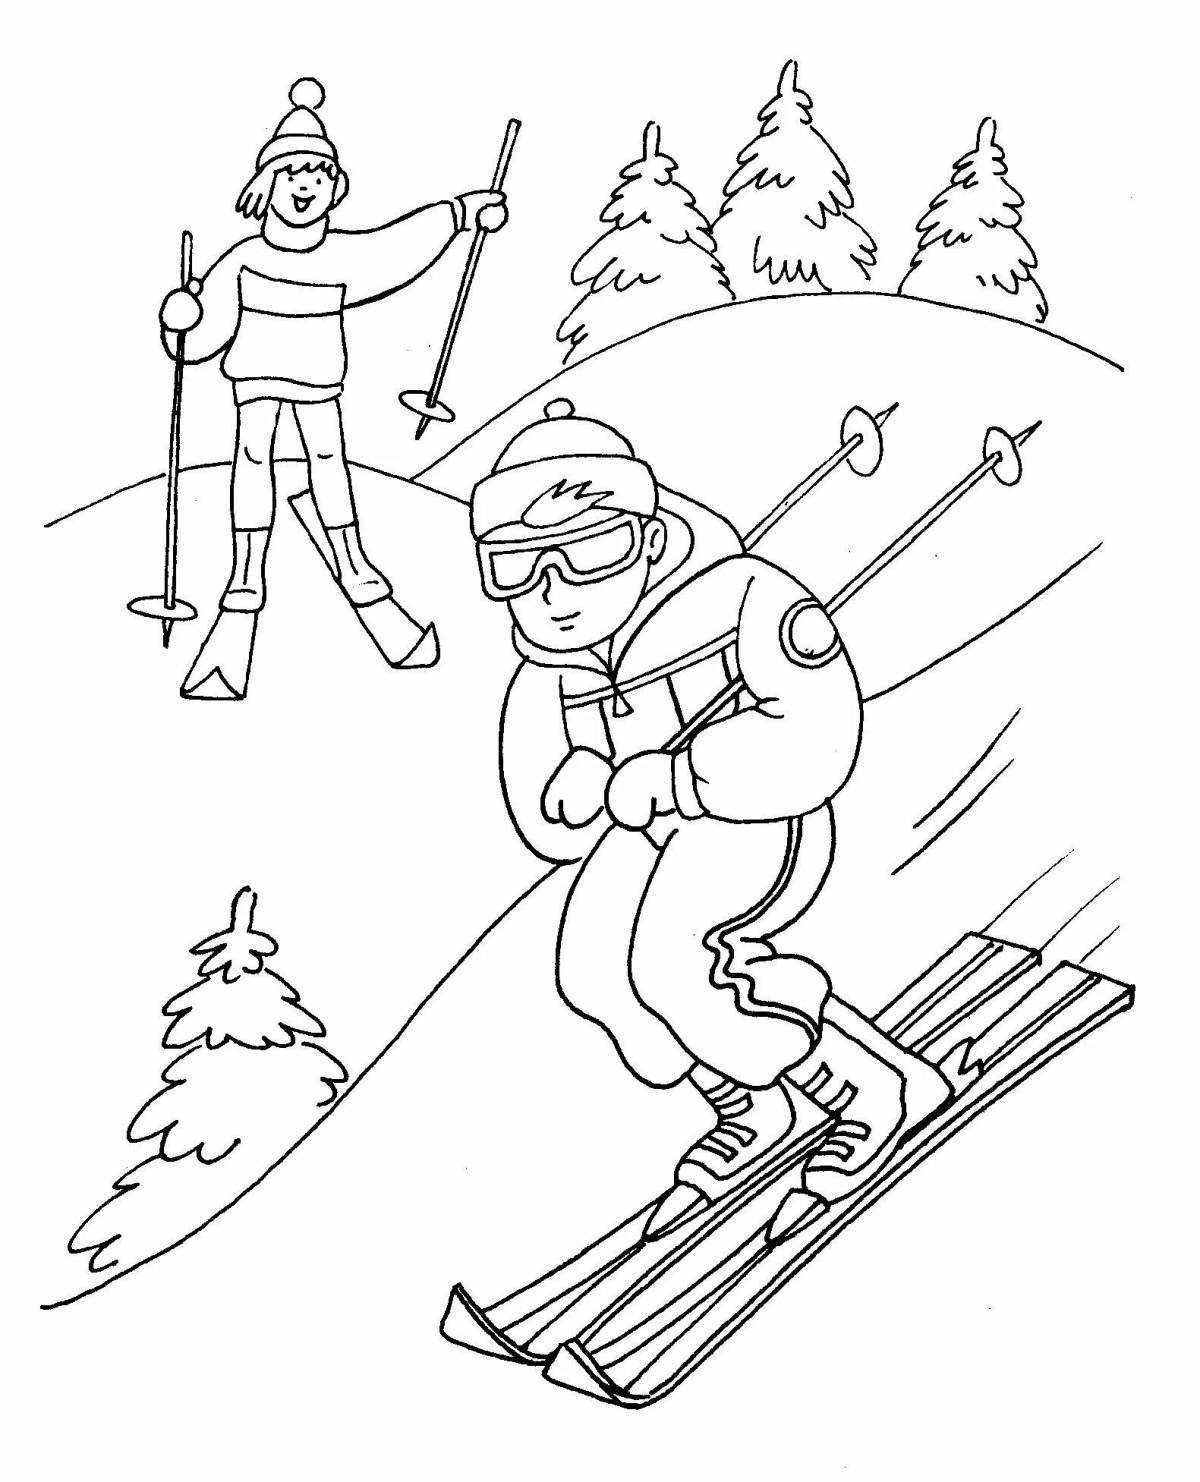 Skier coloring book for children 6-7 years old